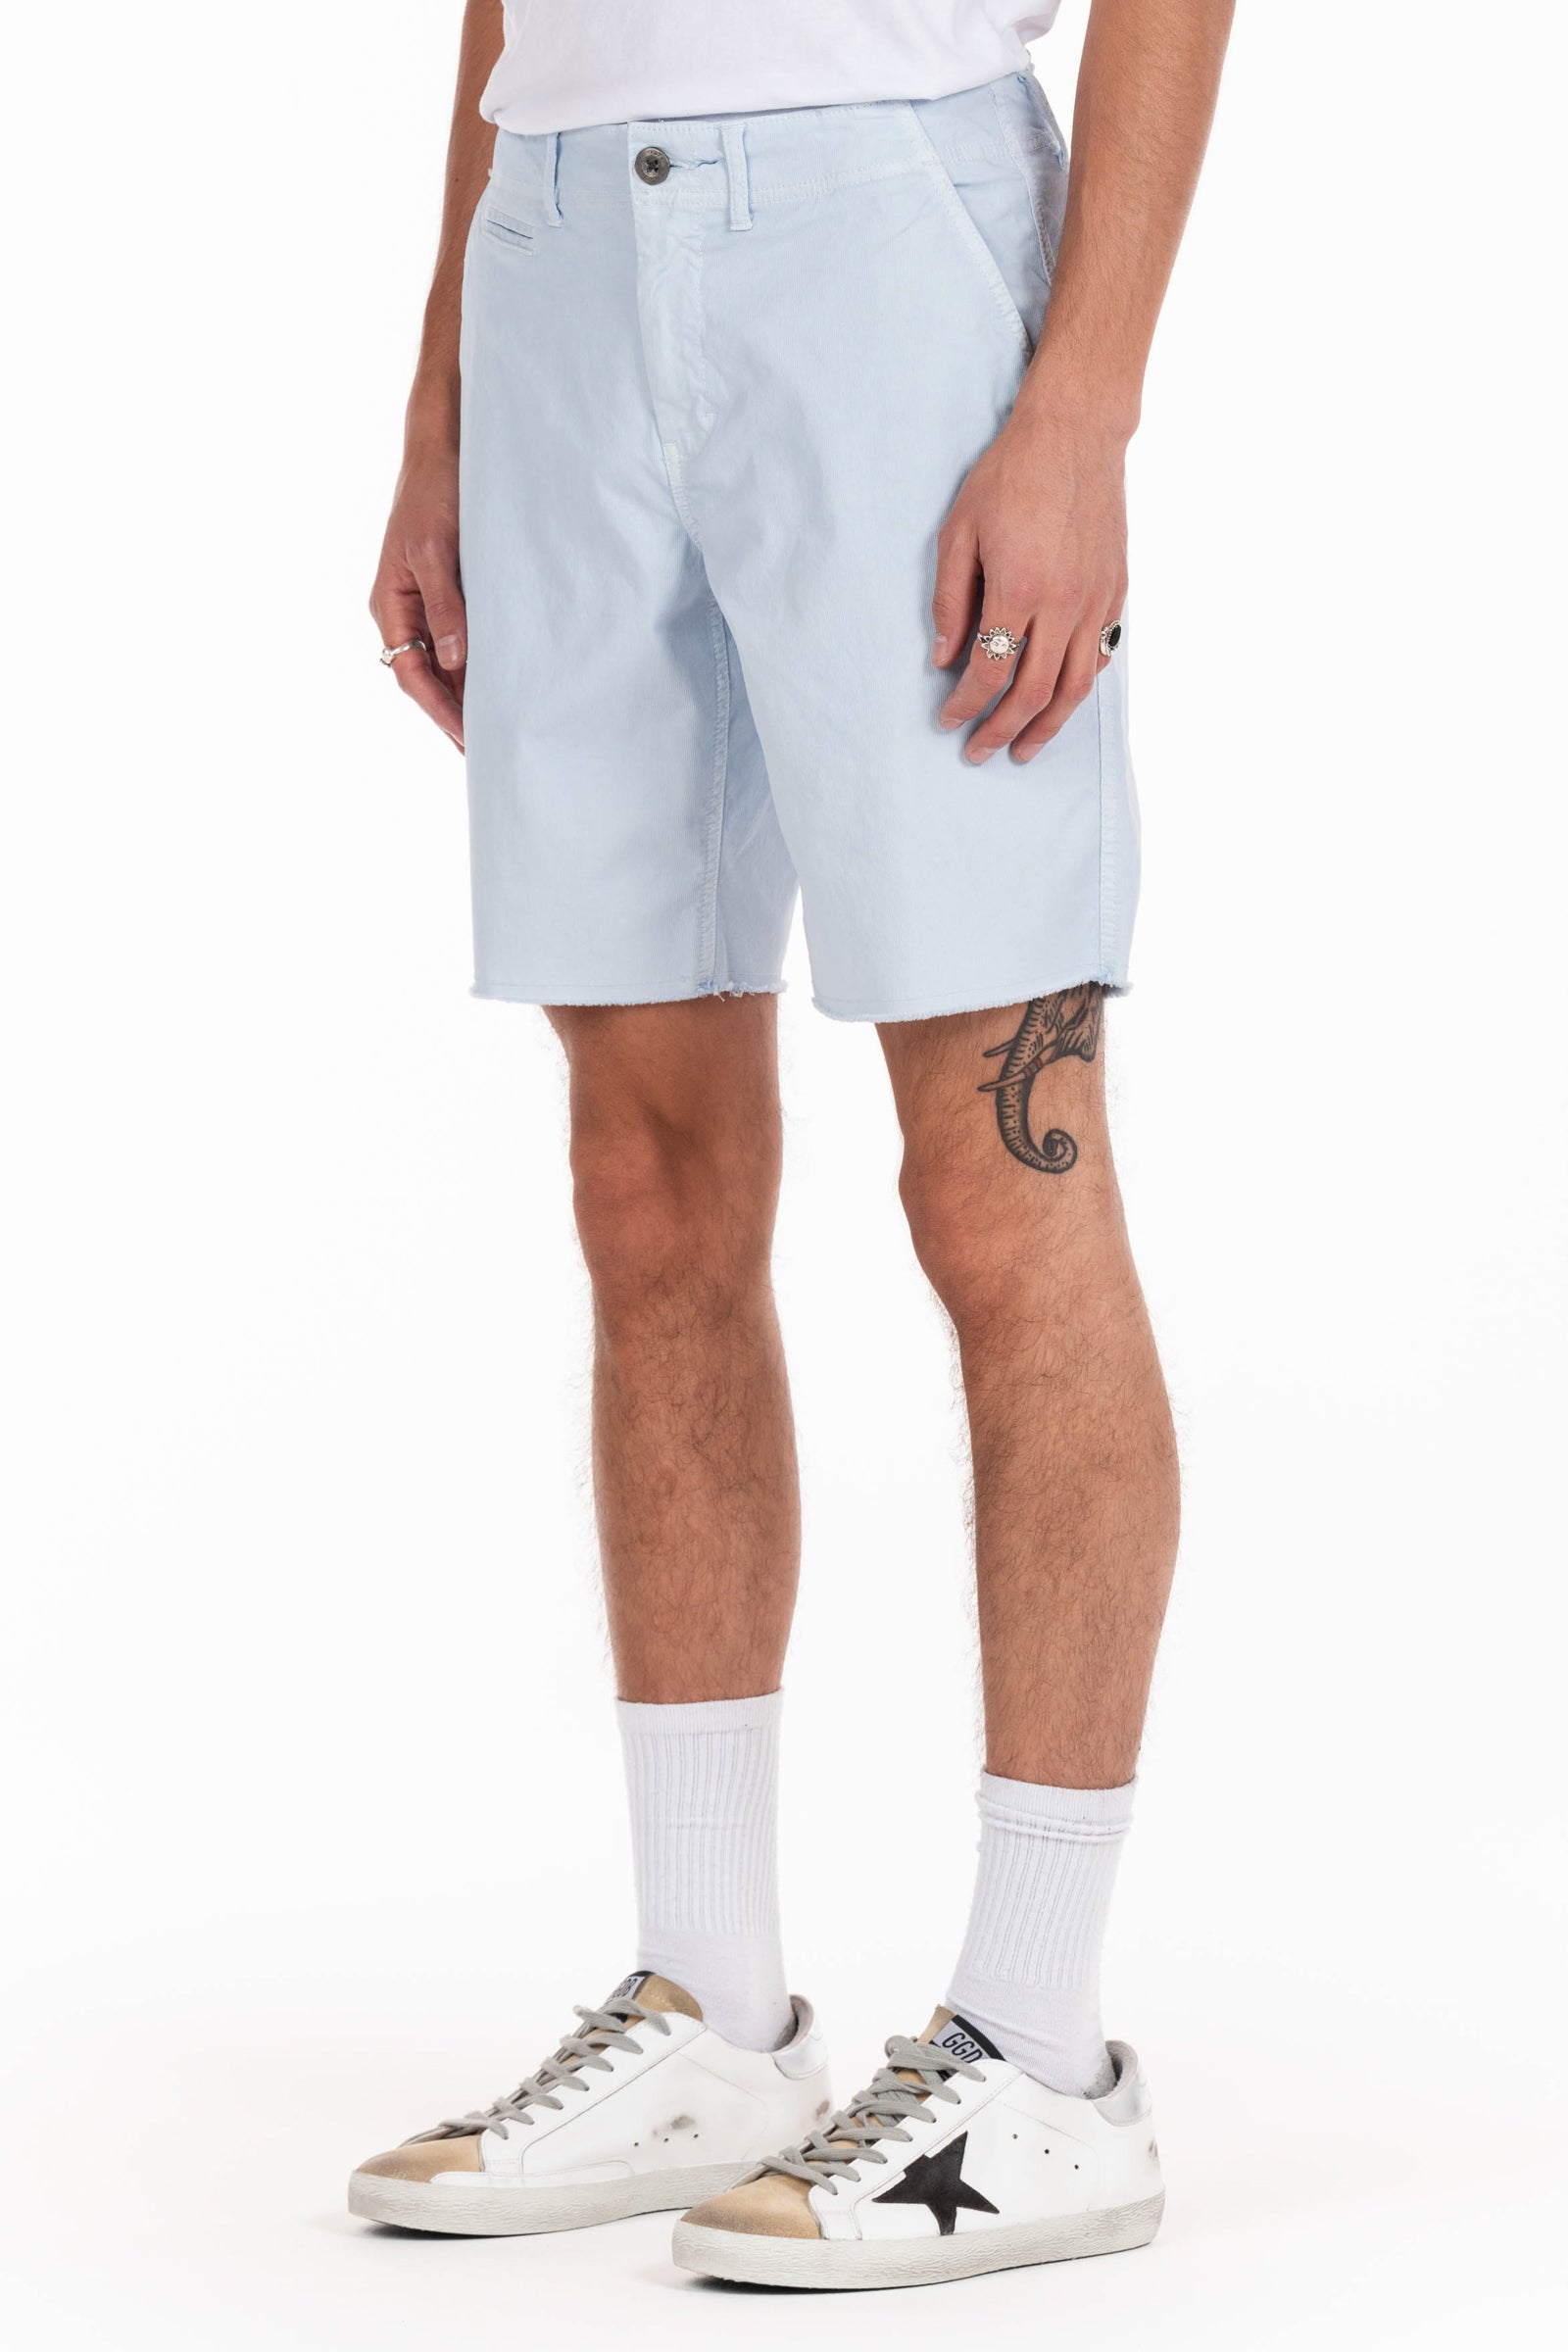 Original Paperbacks Brentwood Chino Short in Waterfall on Model Cropped Side View